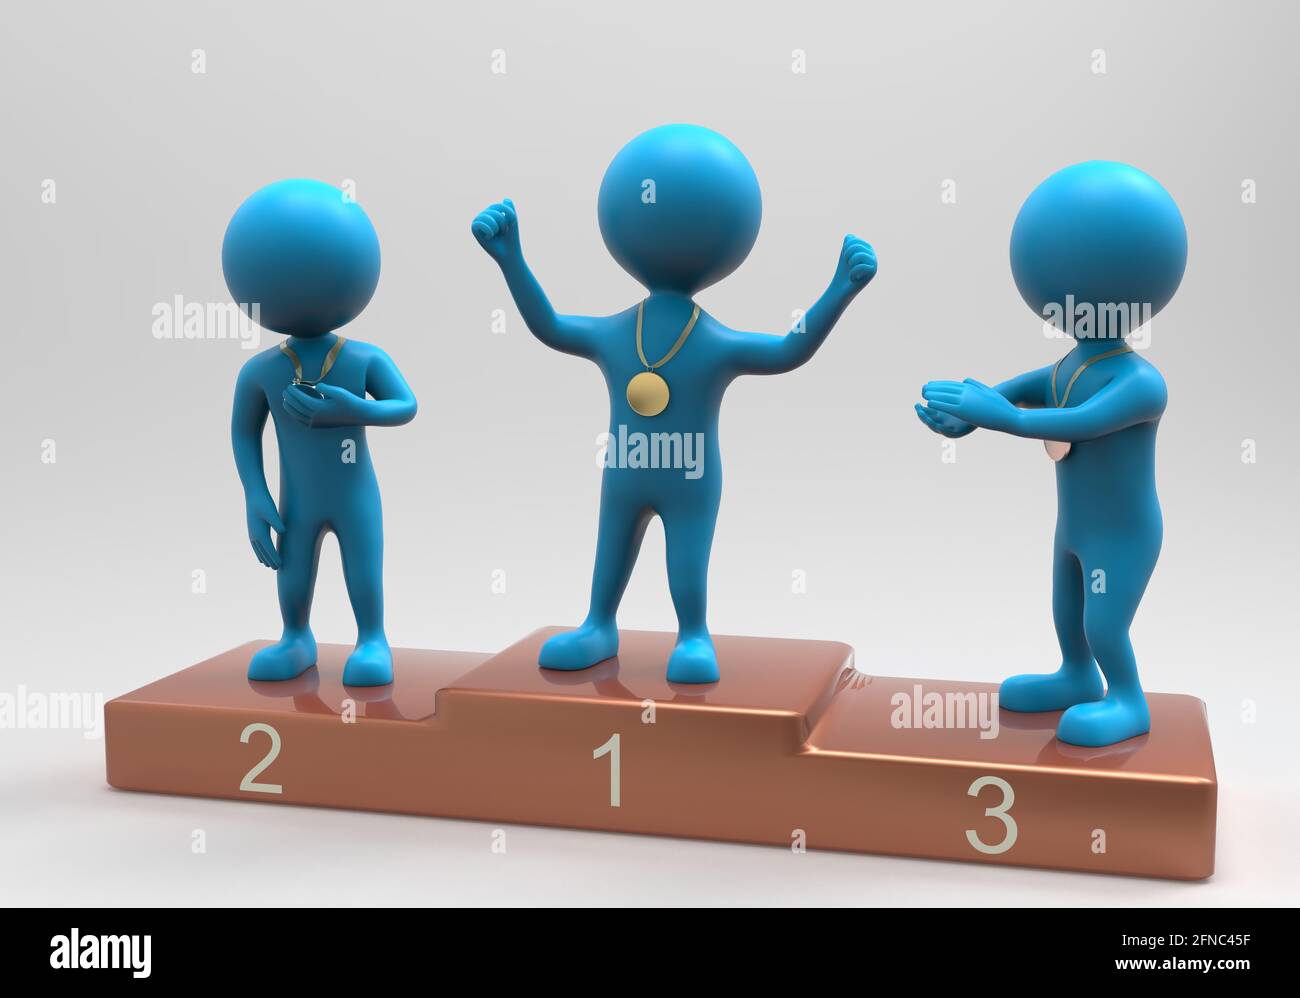 3d rendering of balloonhead cuties standing on  the victory podium Stock Photo